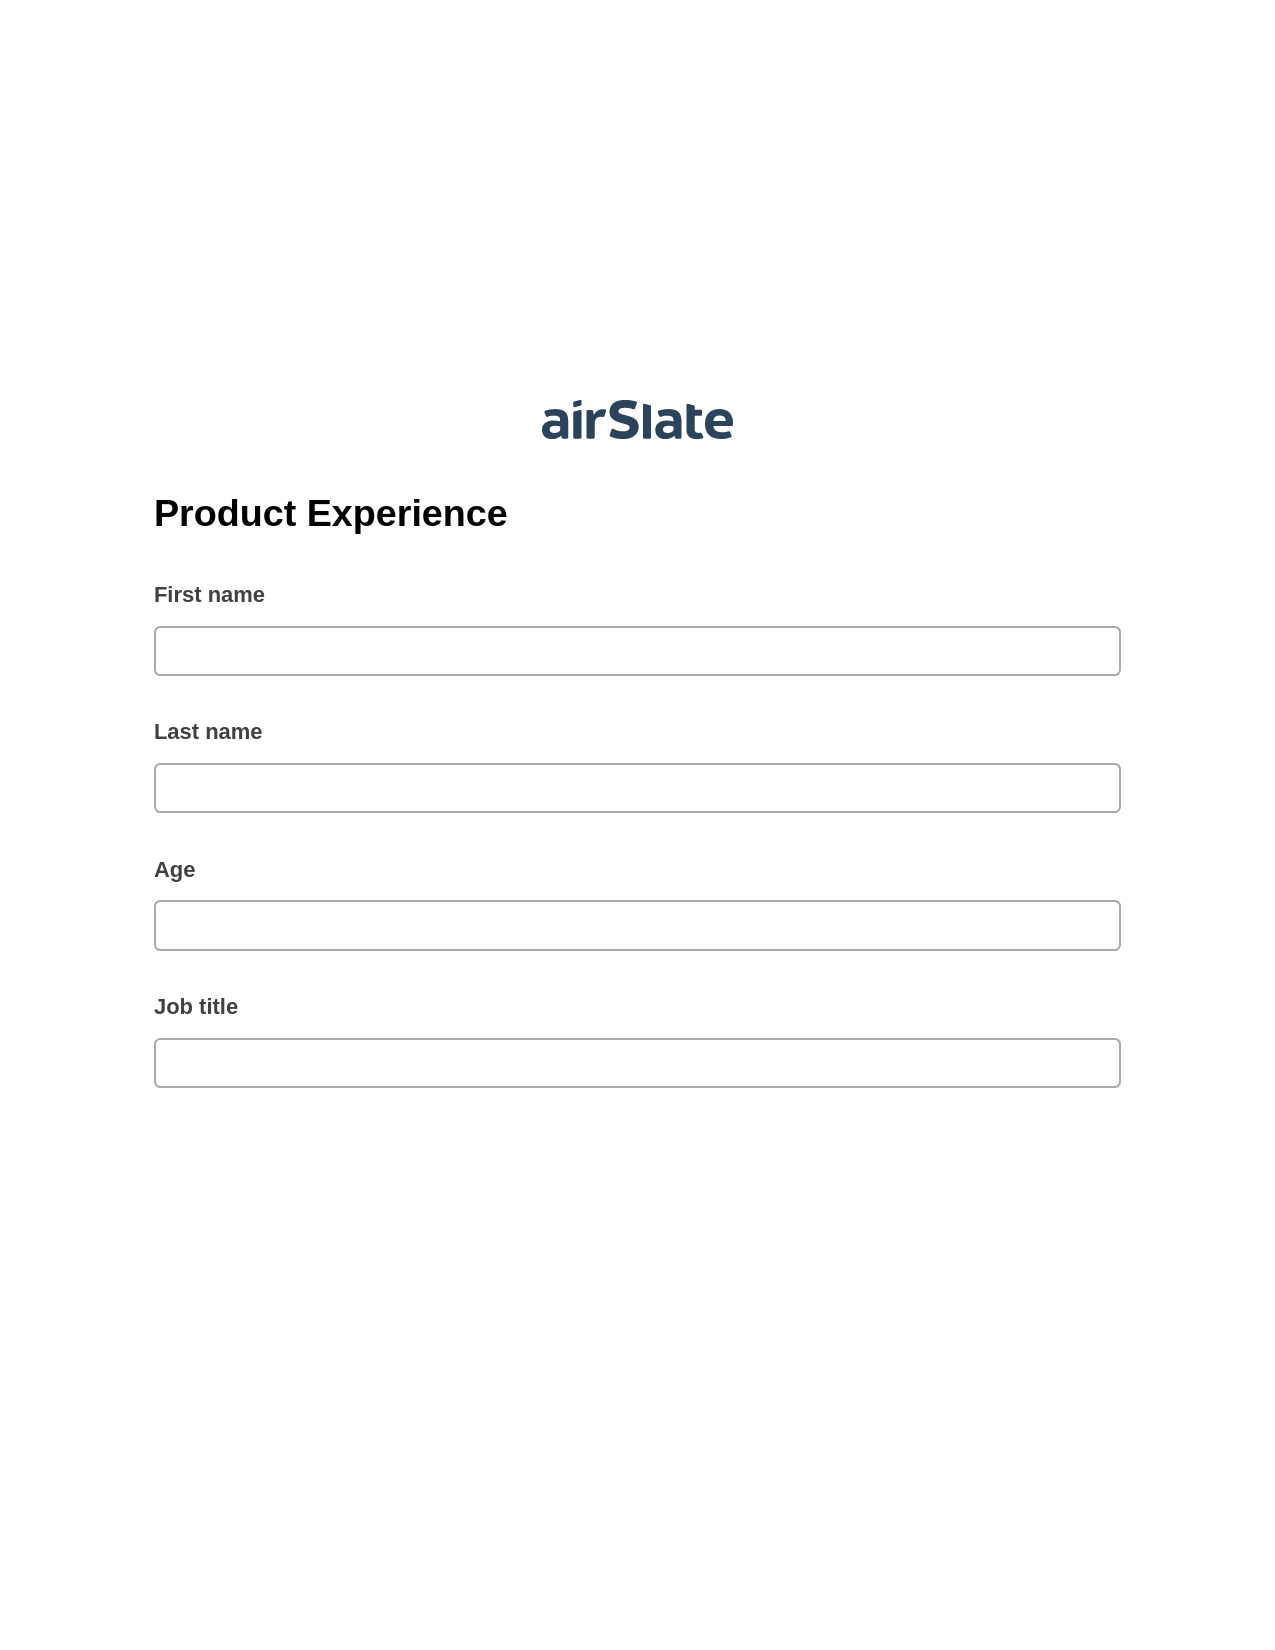 Product Experience Pre-fill from CSV File Bot, Jira Bot, Export to Google Sheet Bot